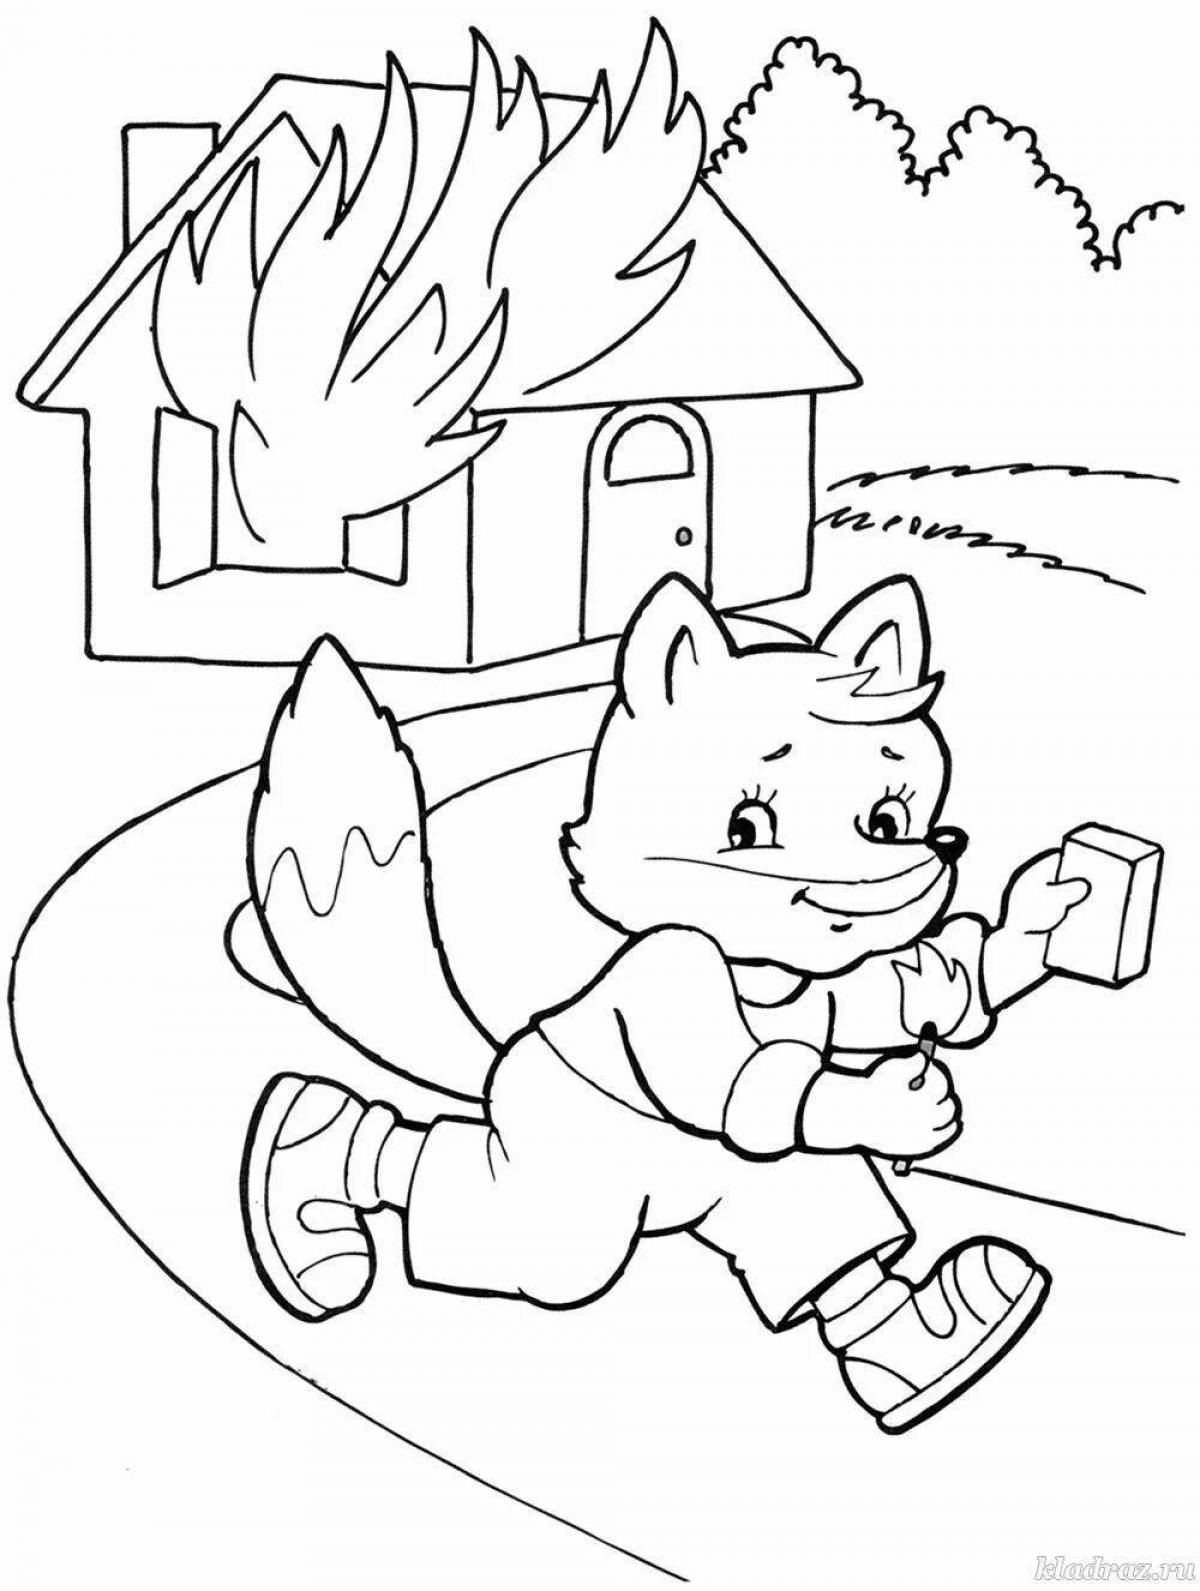 Glittering cat house coloring page for preschoolers